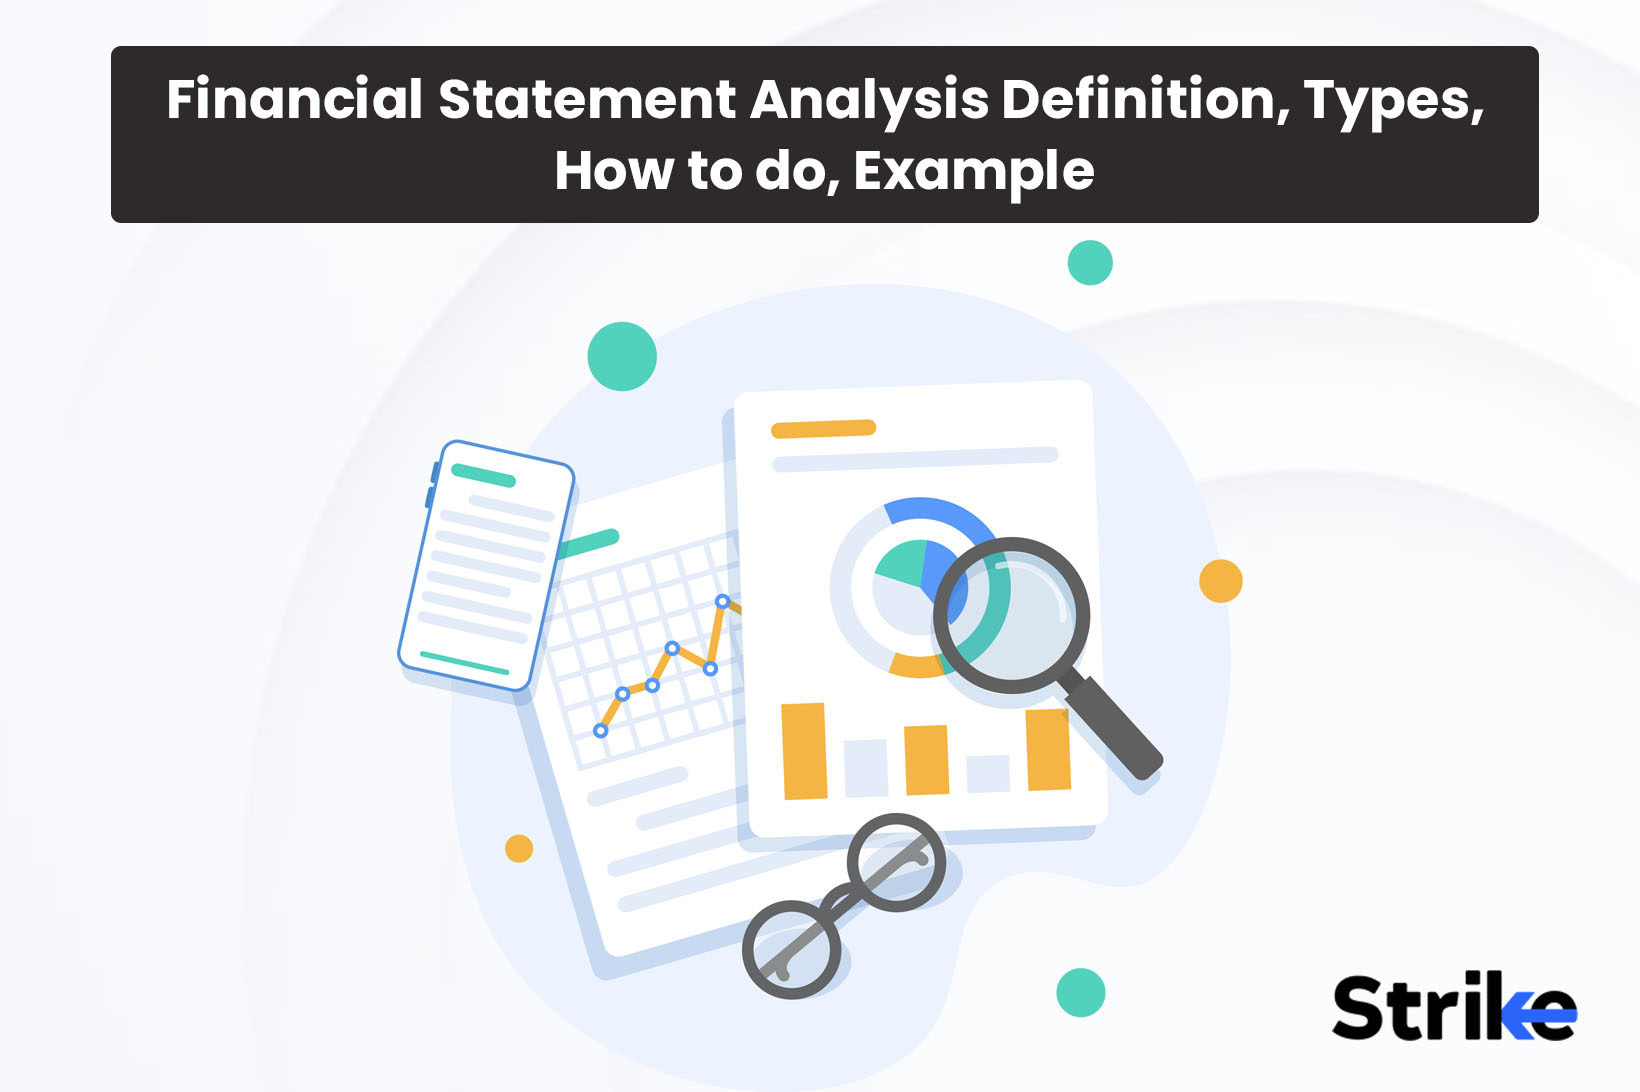 Financial Statement Analysis: Definition, Types, How to do, Example